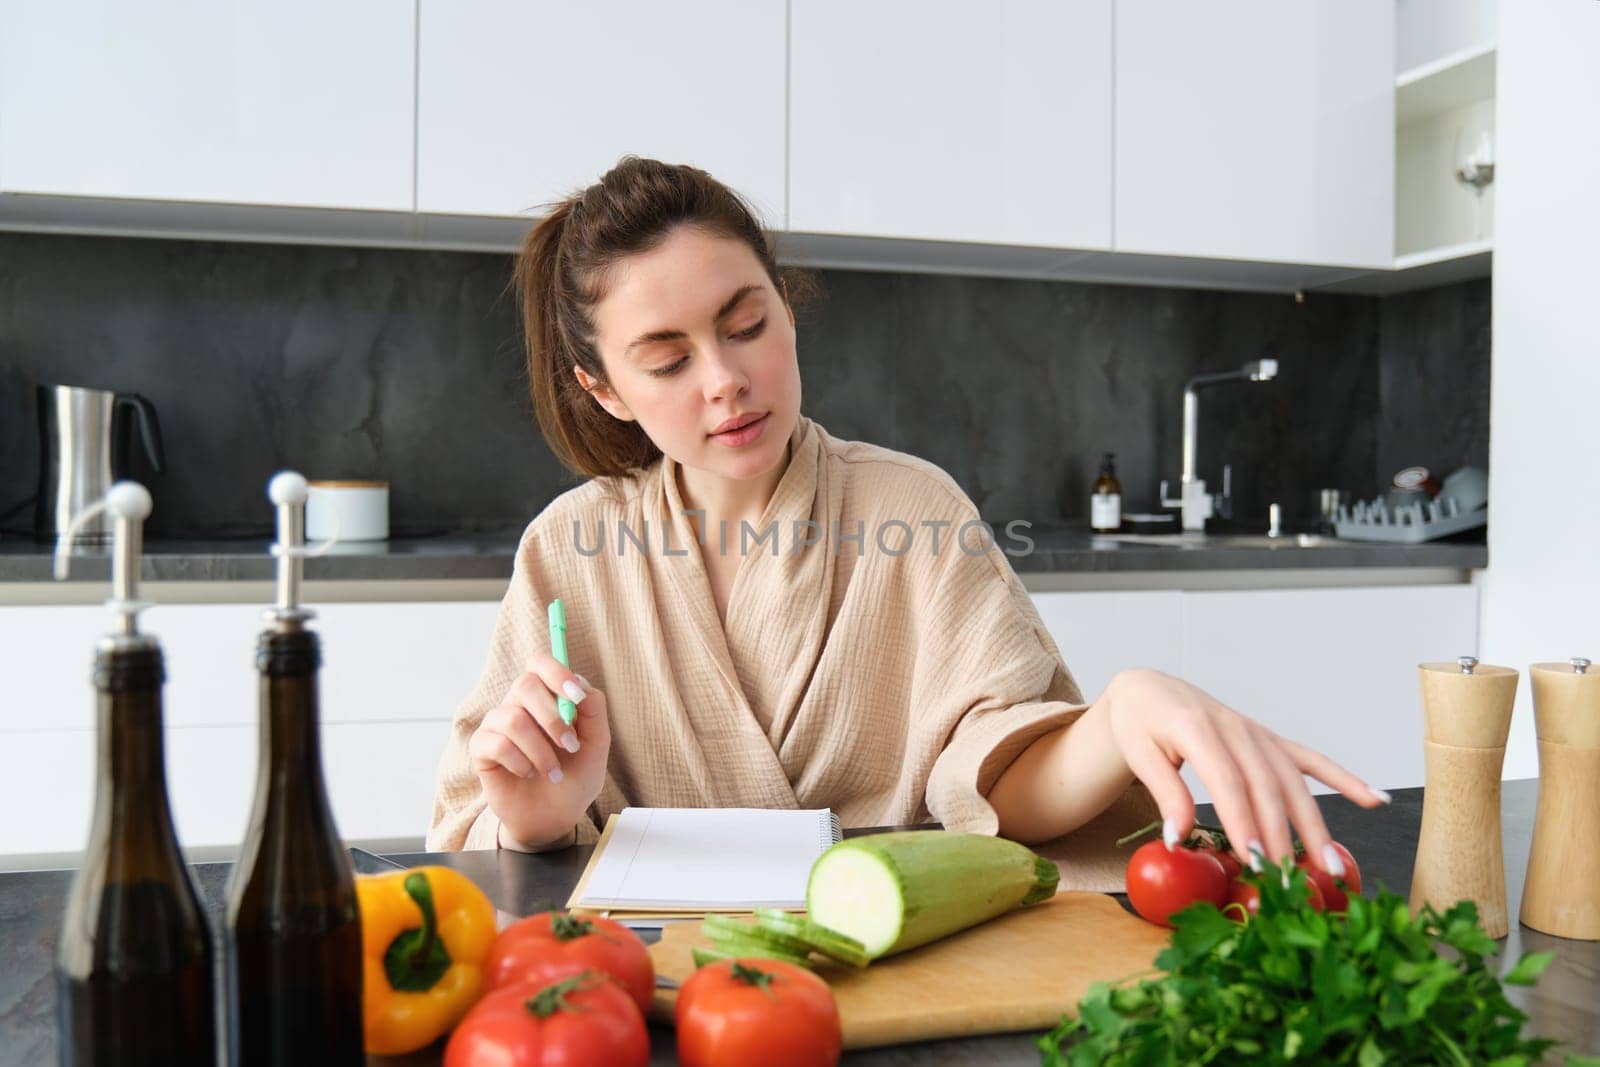 Portrait of woman cooking in the kitchen, sitting in front of vegetables, tomatoes zucchini and parsley, making list of groceries, writing down recipe, wearing bathrobe.